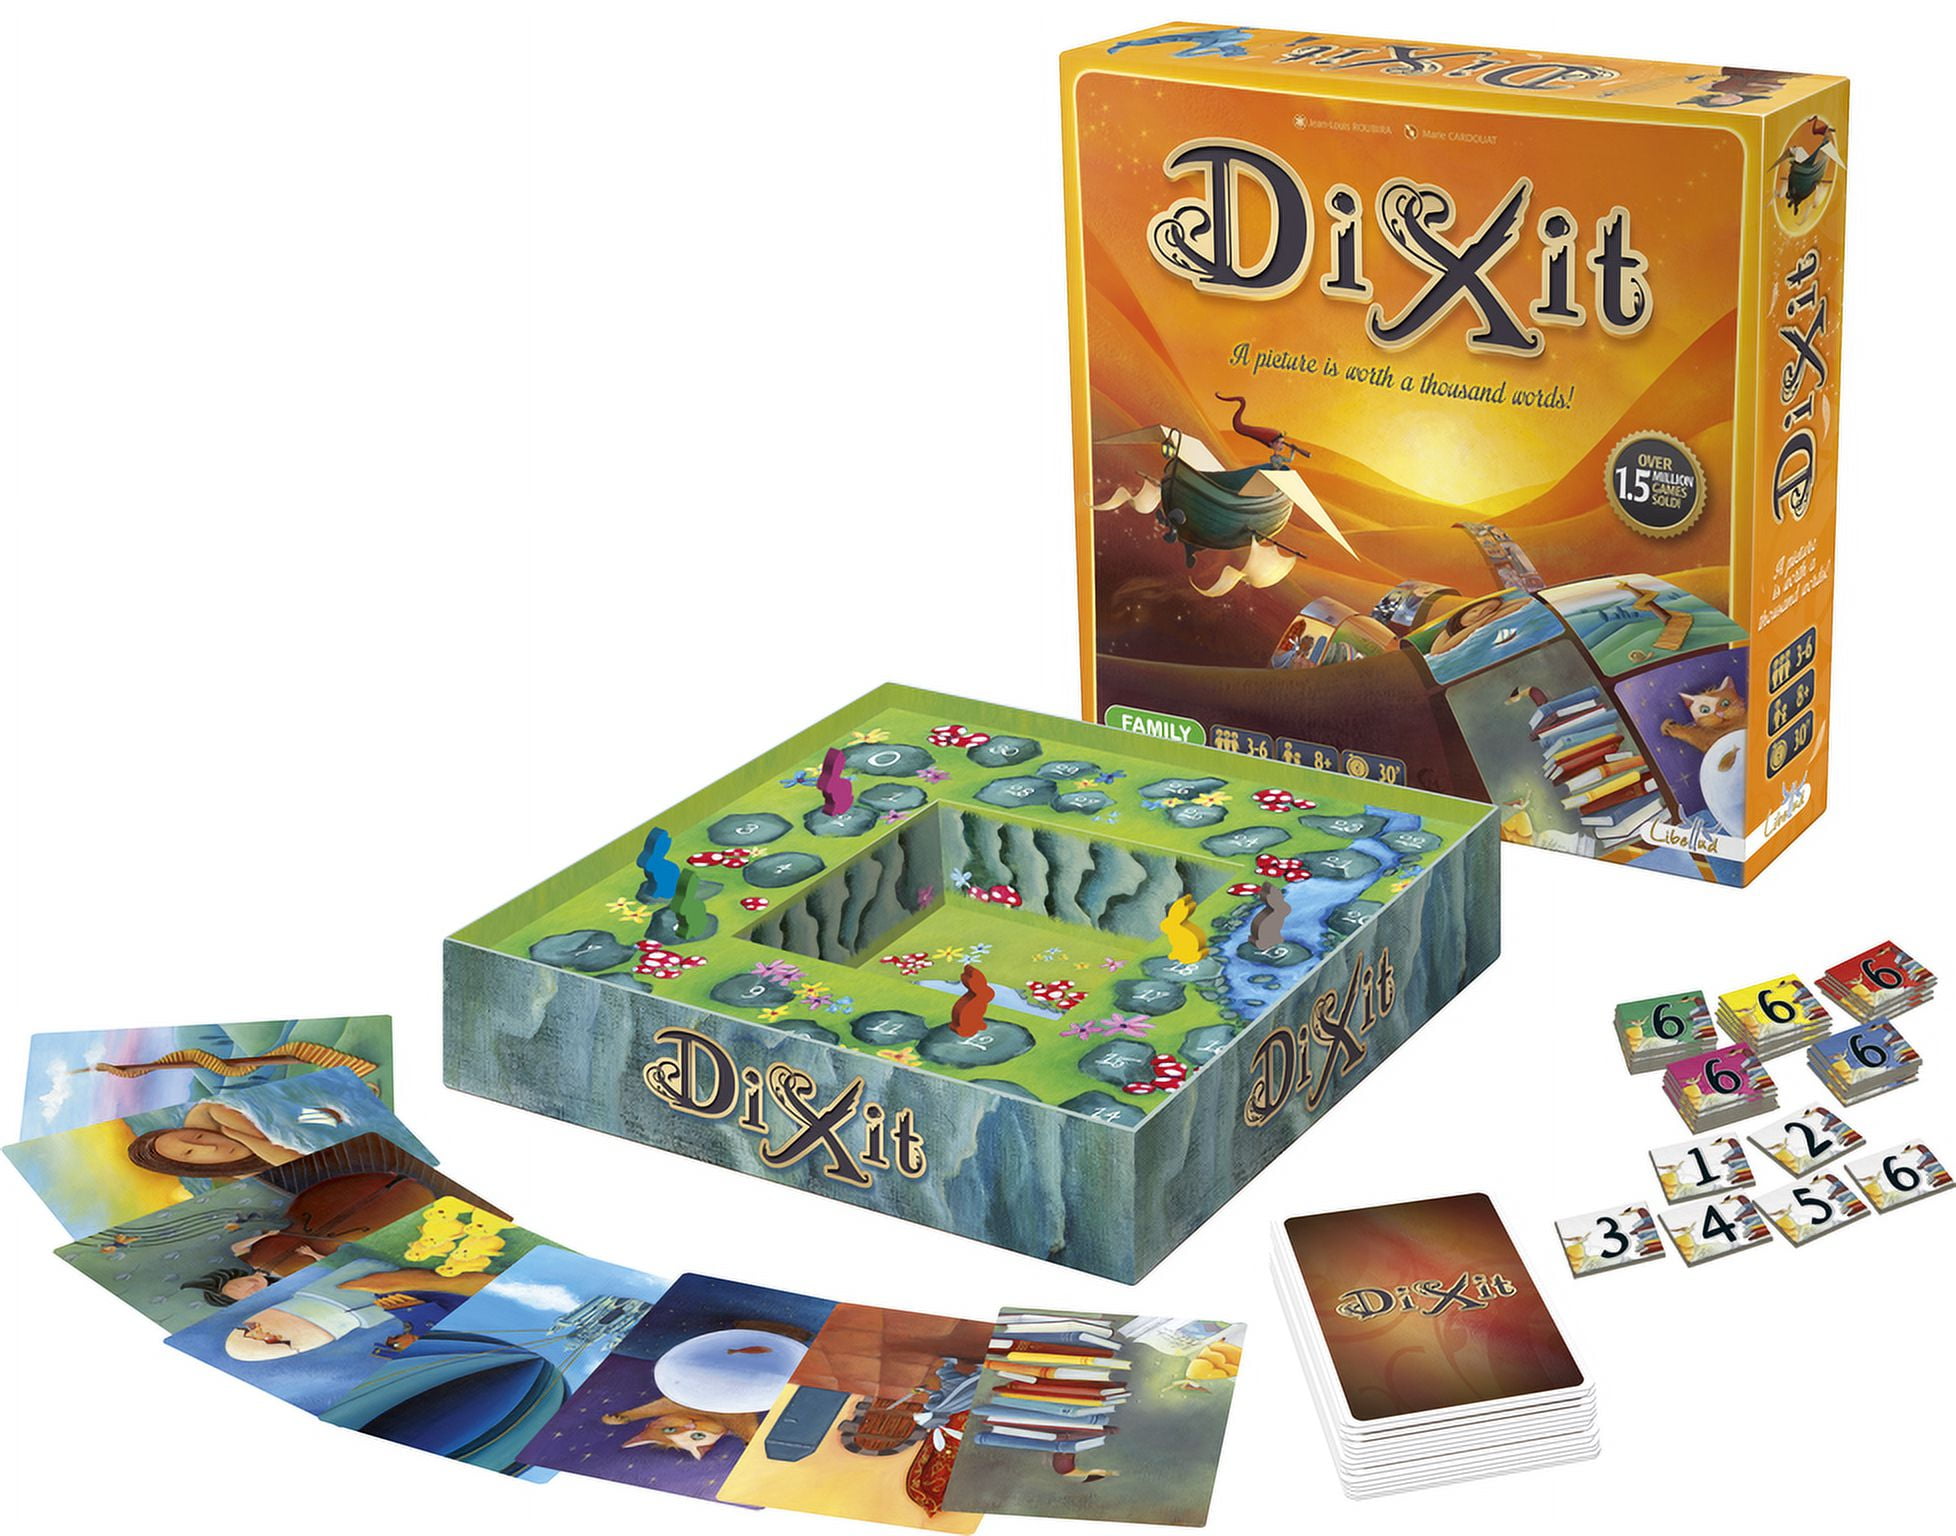 Dixit Game Review: Perfect For Multi-Age & Extended Families!